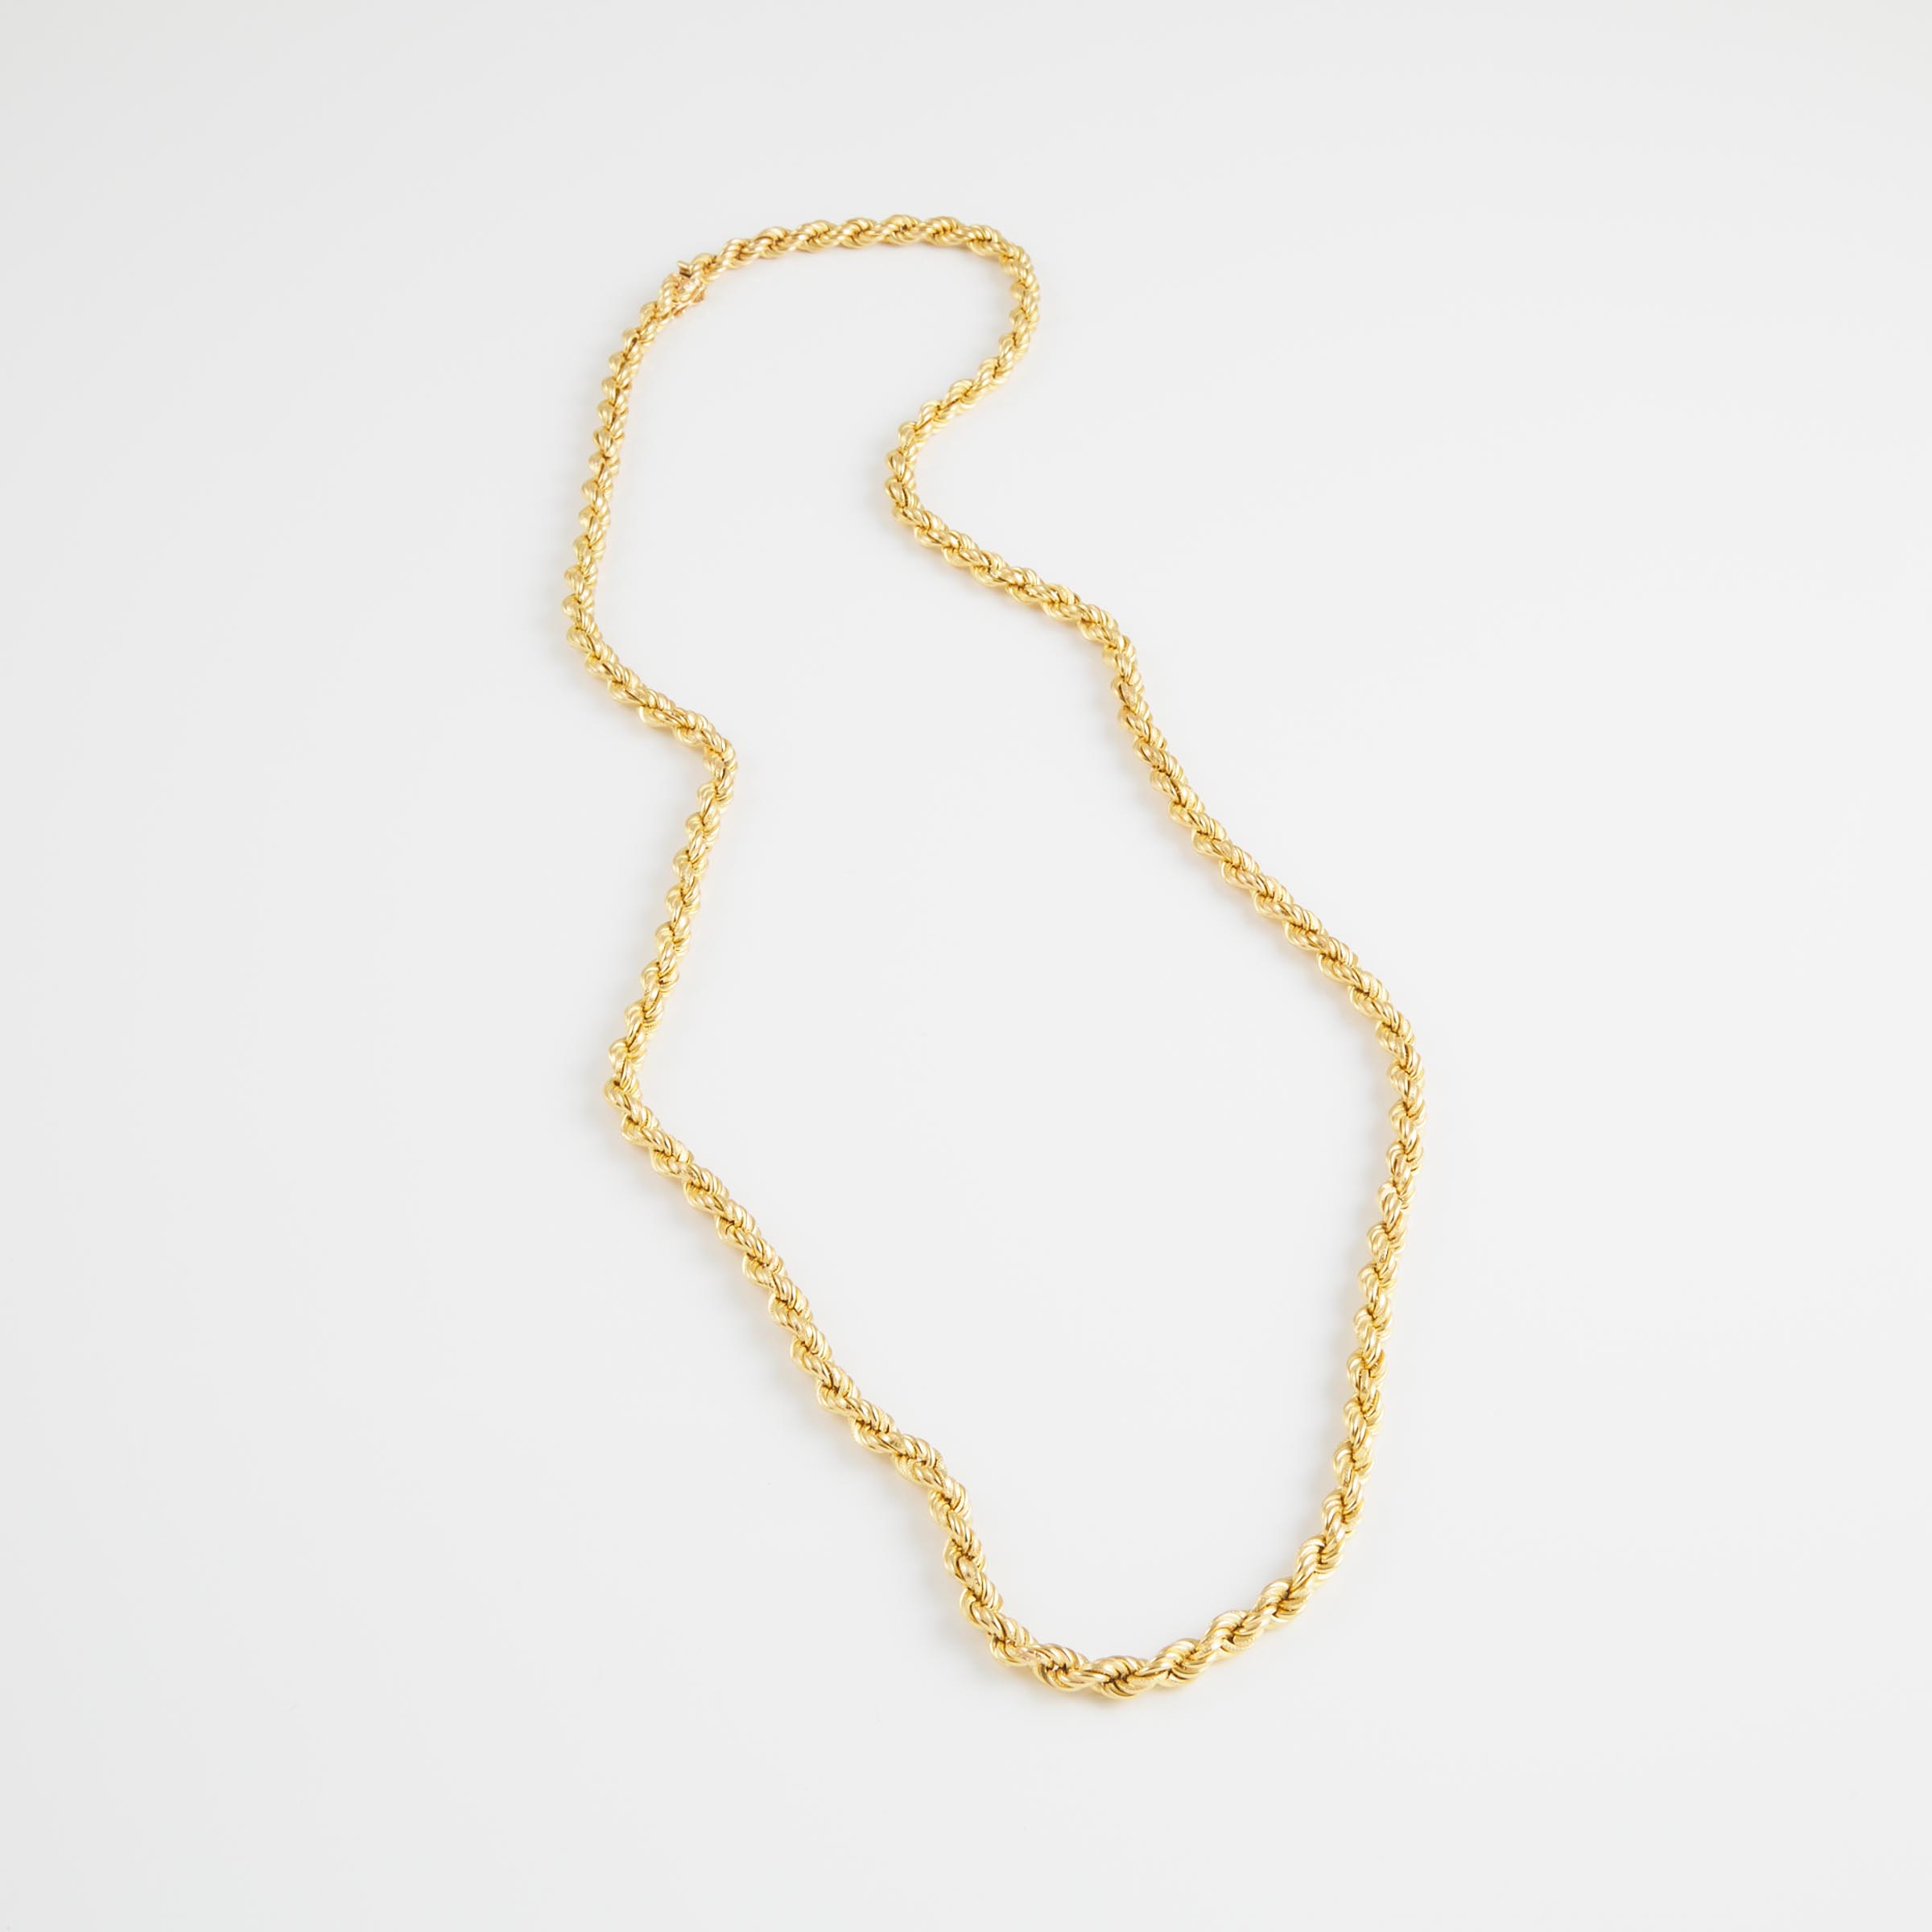 18k Yellow Gold Rope Twist Necklace